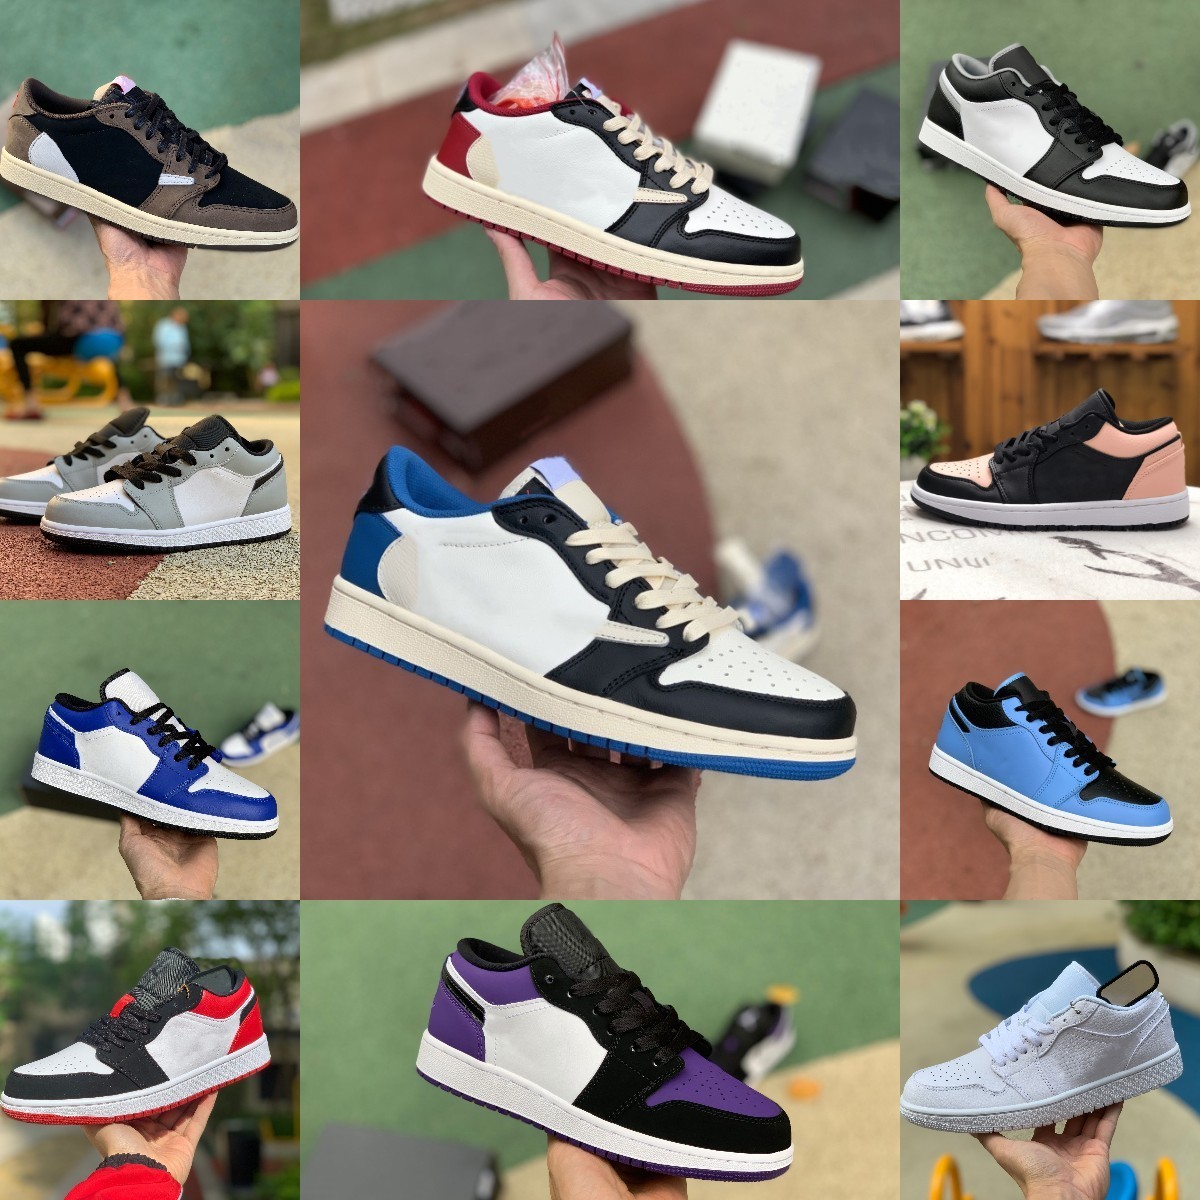 

2022 Fragment TS Jumpman X 1 1S Low Basketball Shoes Starfish White Brown Red Gold Banned UNC Court Purple Black Toe Shadow Panda Emerald Designer Sports Sneakers Y998, Please contact us